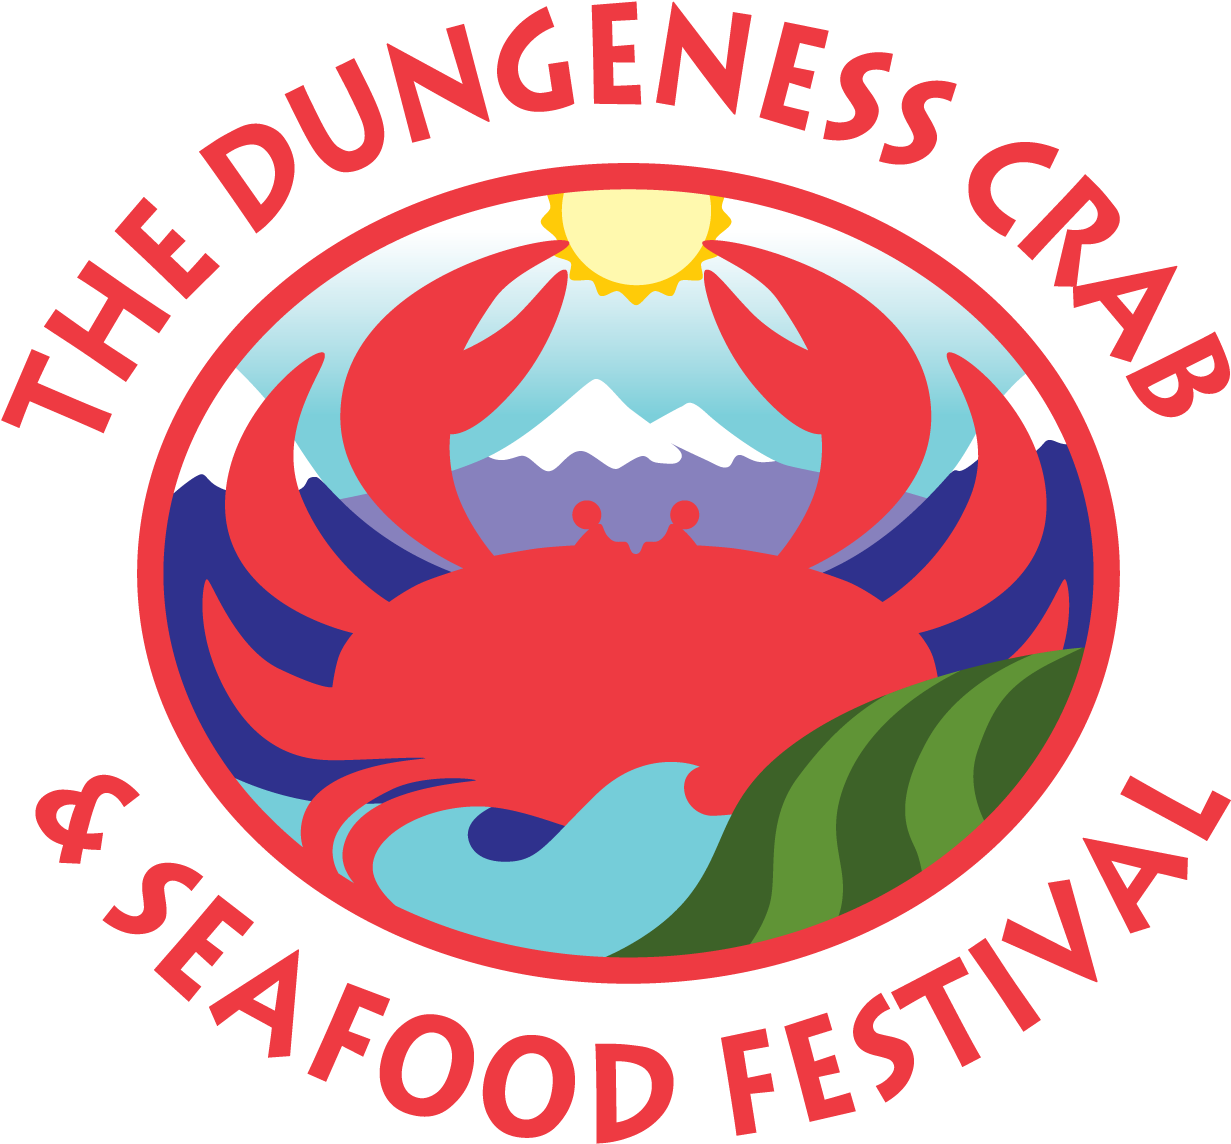 Crabfest Logo Full Color - Dungeness Crab & Seafood Festival (1283x1193)